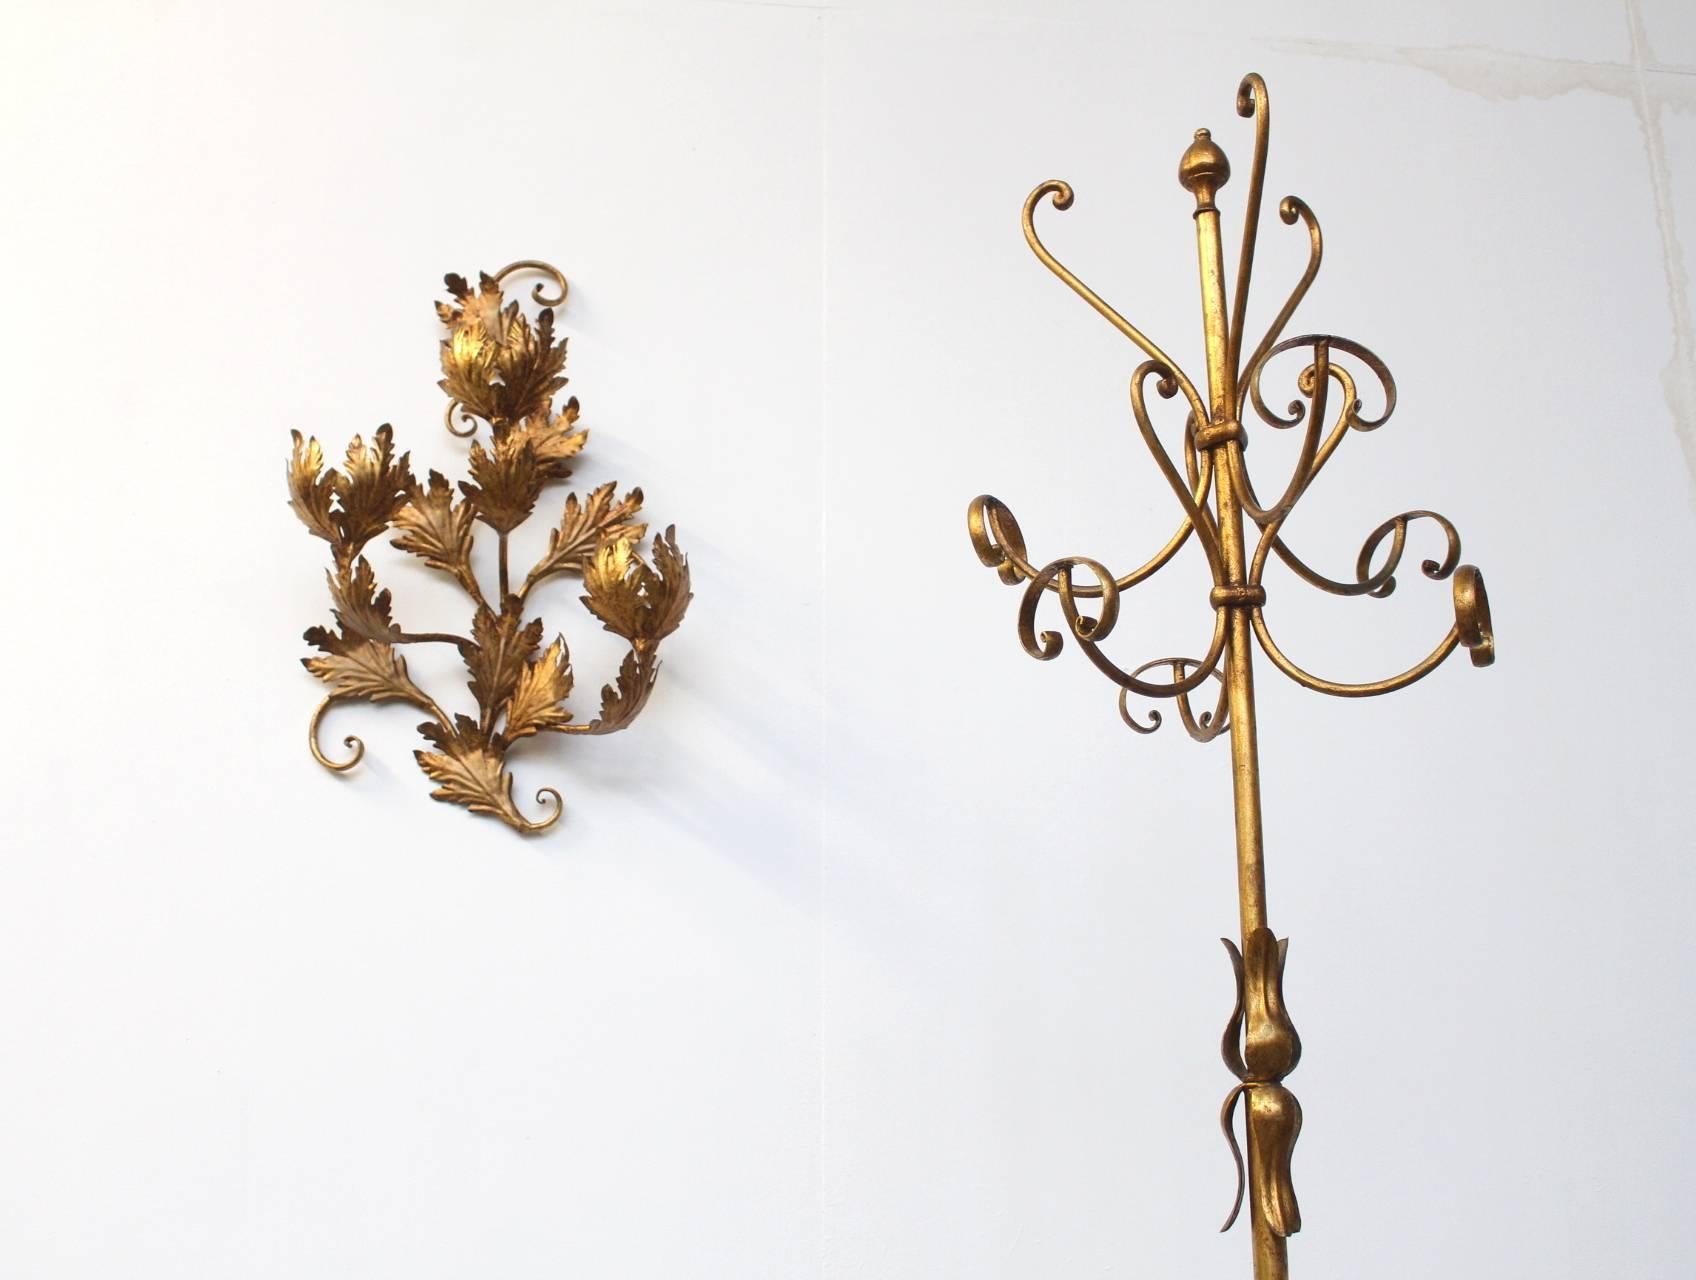 Beautiful eye-catching hall way set of a gold painted metal coat rack with three matching coat hangers, an umbrella basket and a decorative wall object with branches and leafs. All in the style of Adnet and Royere. Measurements below is the coat